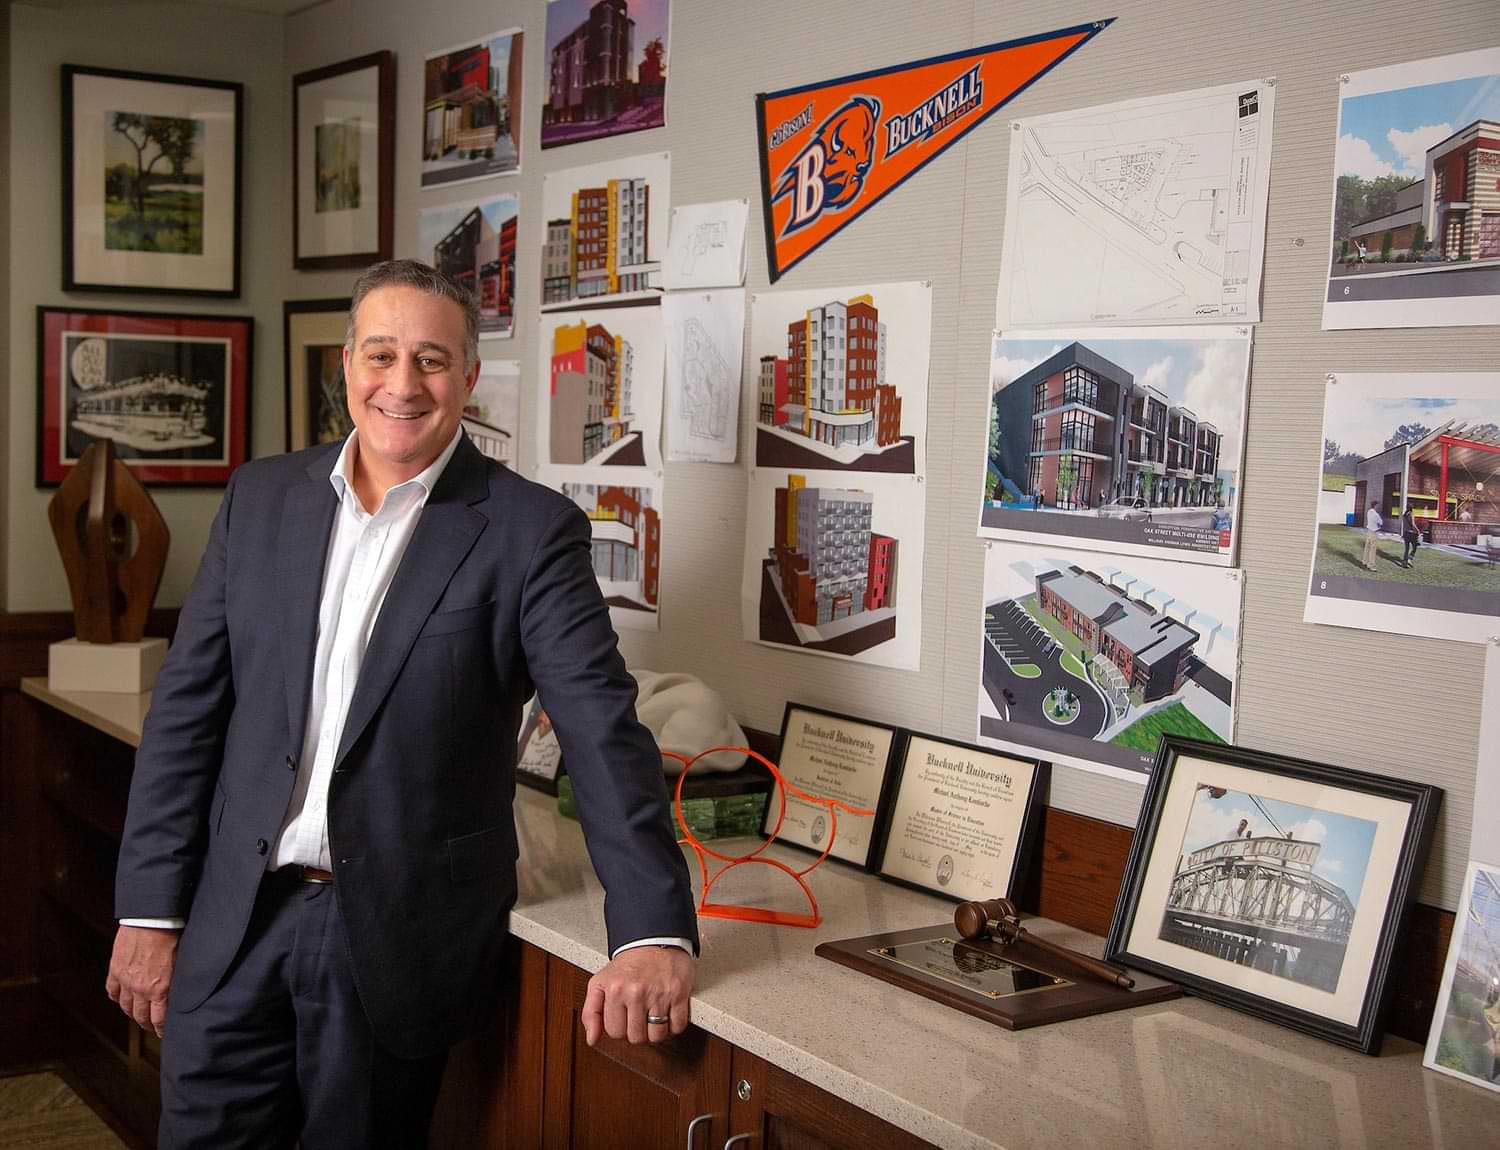 Michael Lombardo smiles while leaning against a counter in his office, various architectural sketches and memorabilia line the walls